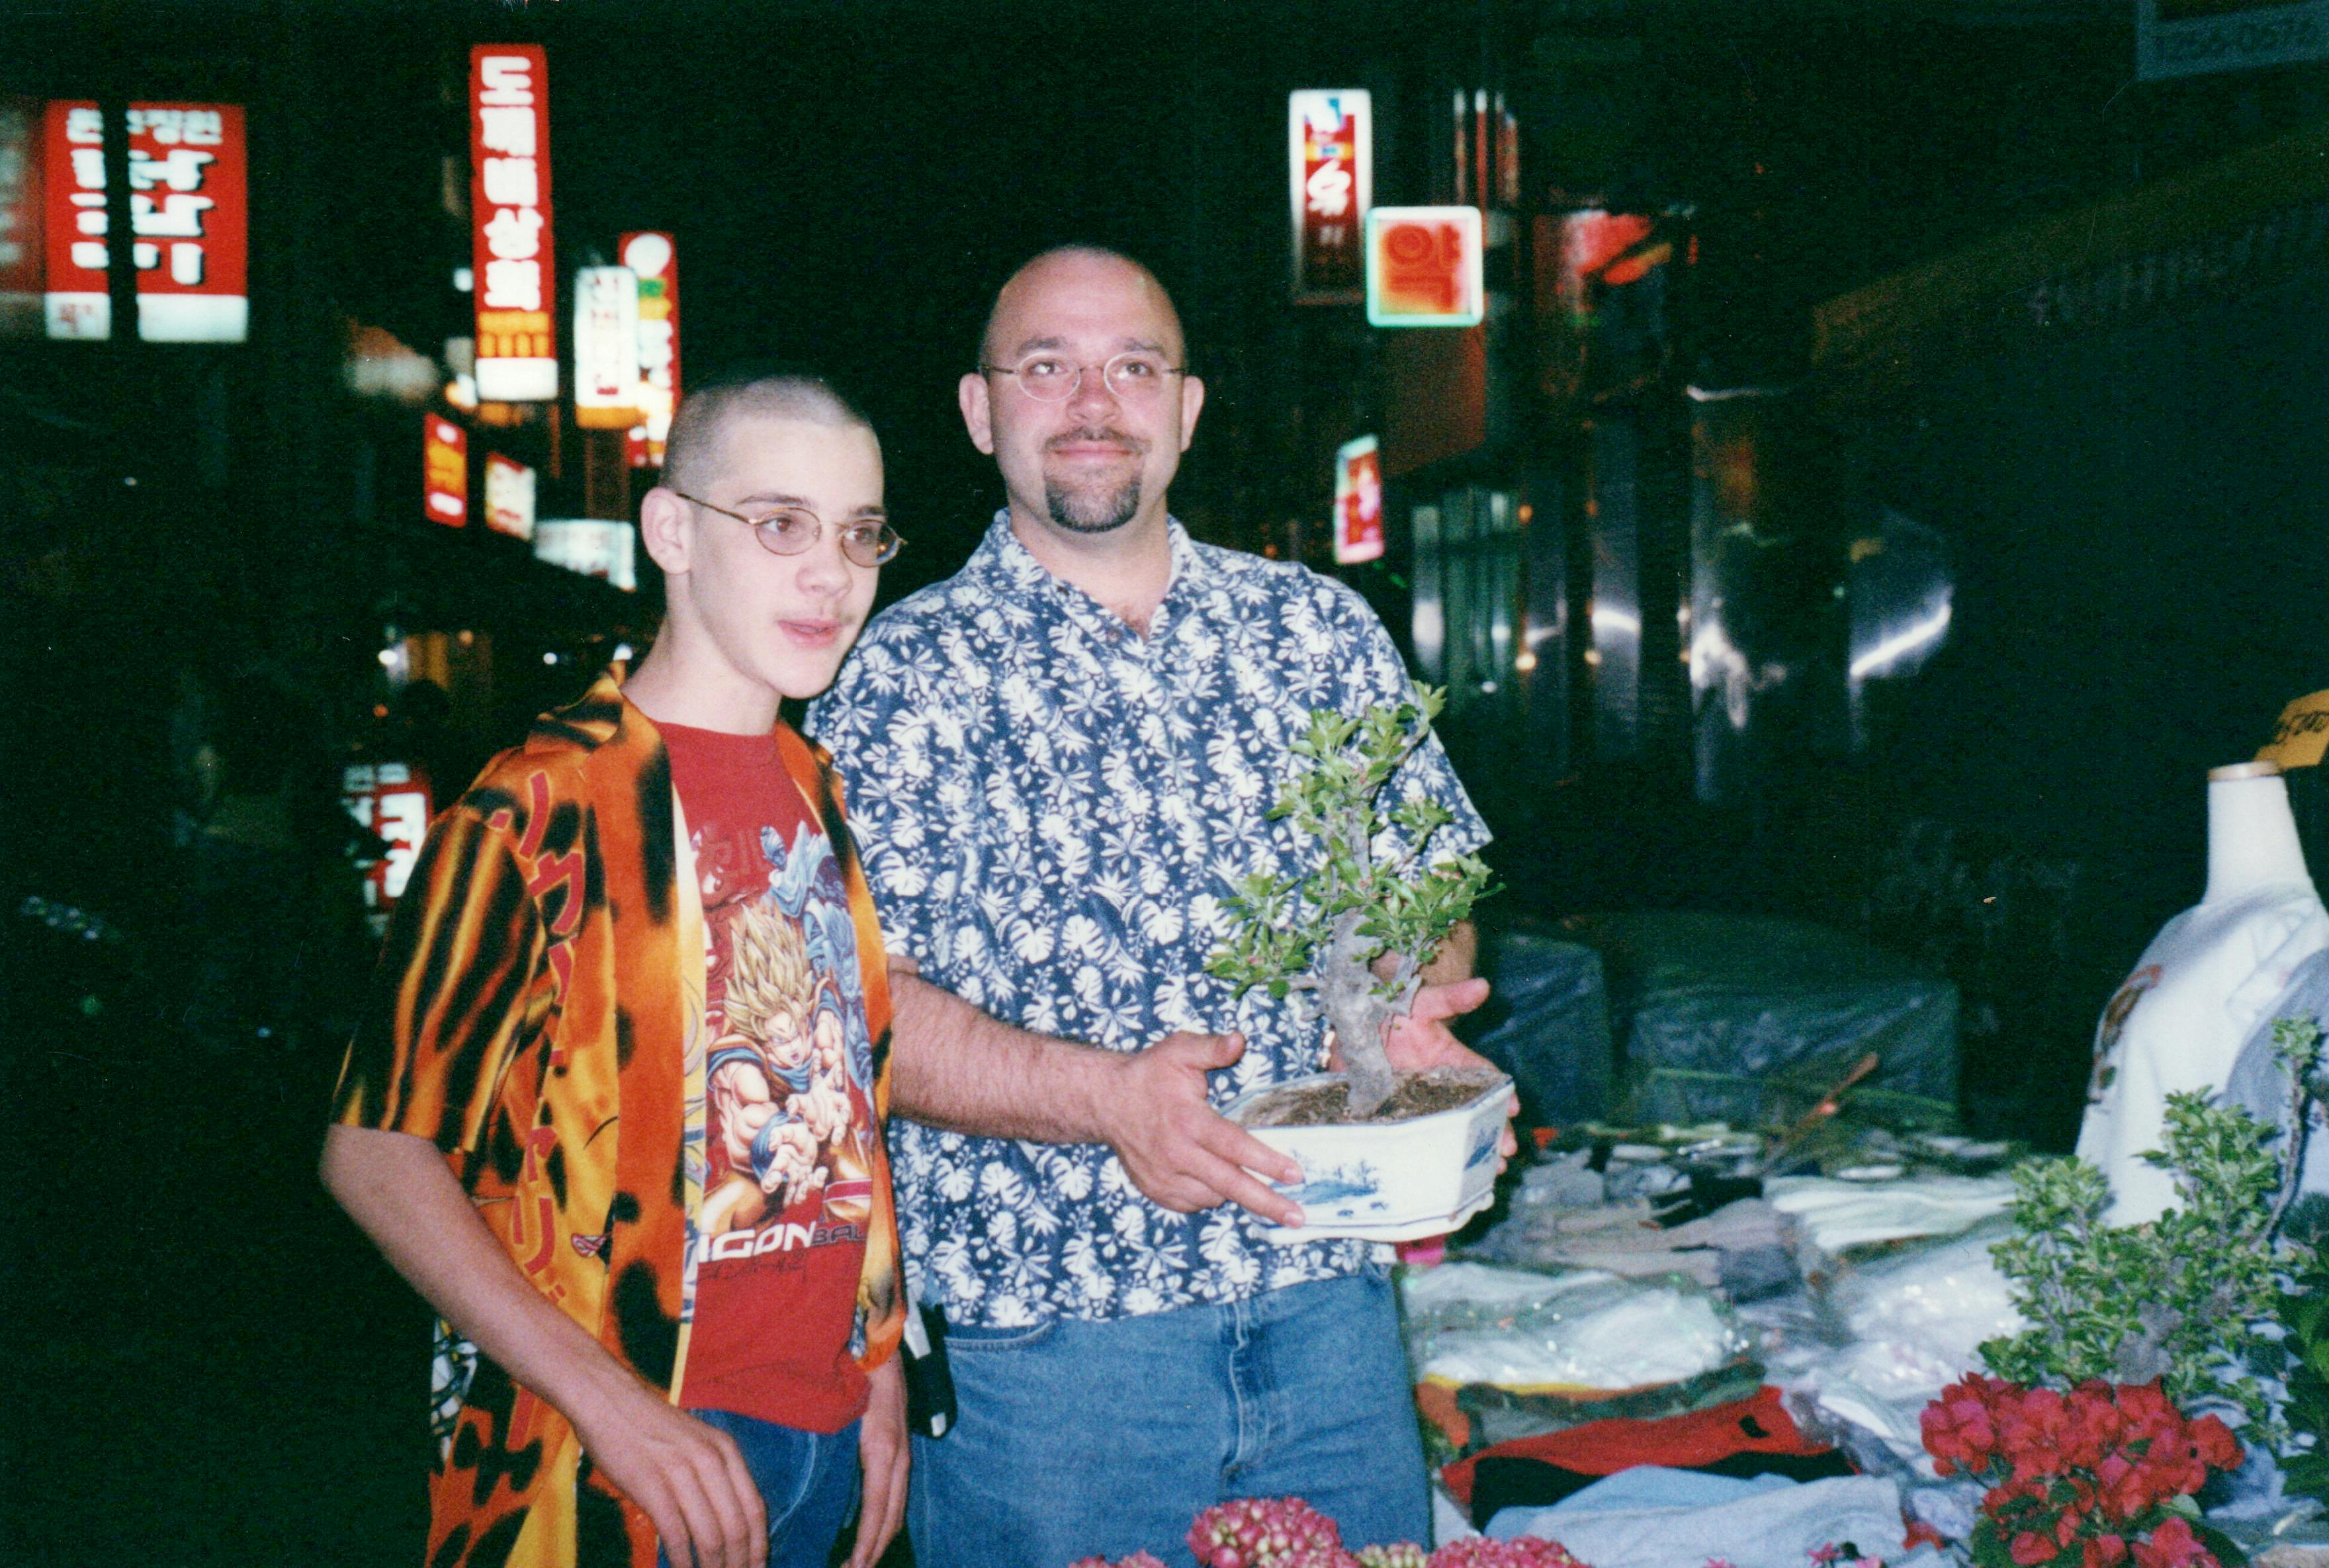 Joseph Emerson with his father in front of a Korean night market bustling with neon signboards. On the left, Joseph sports a laughable flame-patterned shirt over a Dragon Ball Z tee. To the right, Dad holds a small bonsai tree. The foreground shows a variety of goods on display, suggesting a vibrant street market scene.